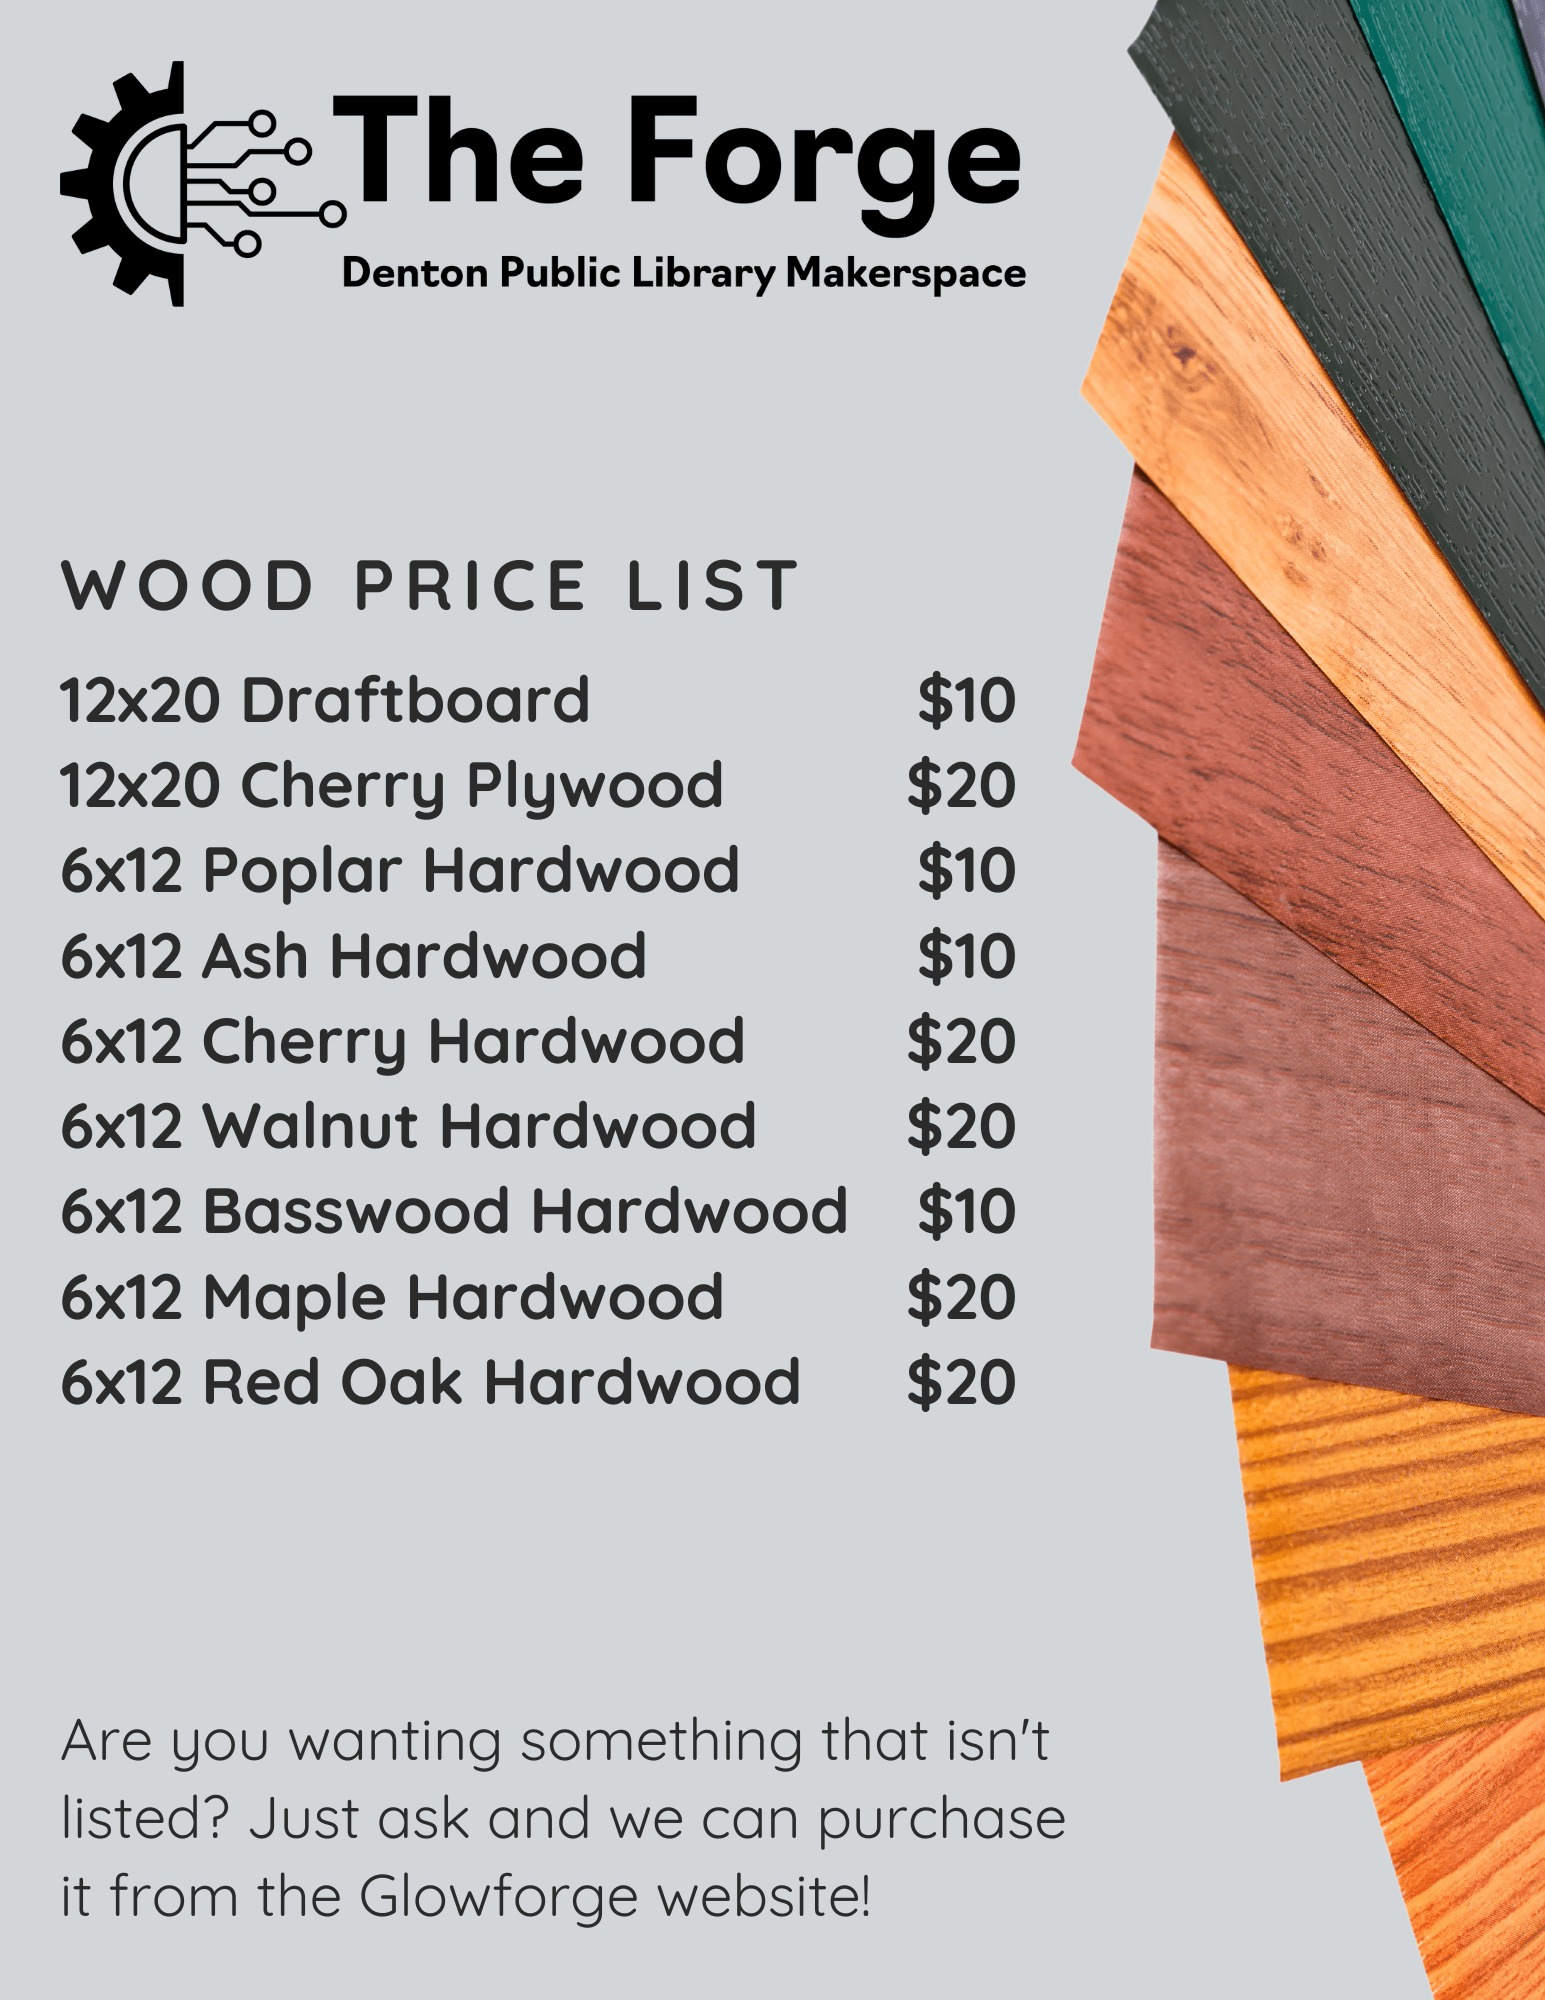 List of Forge wood materials and their prices.